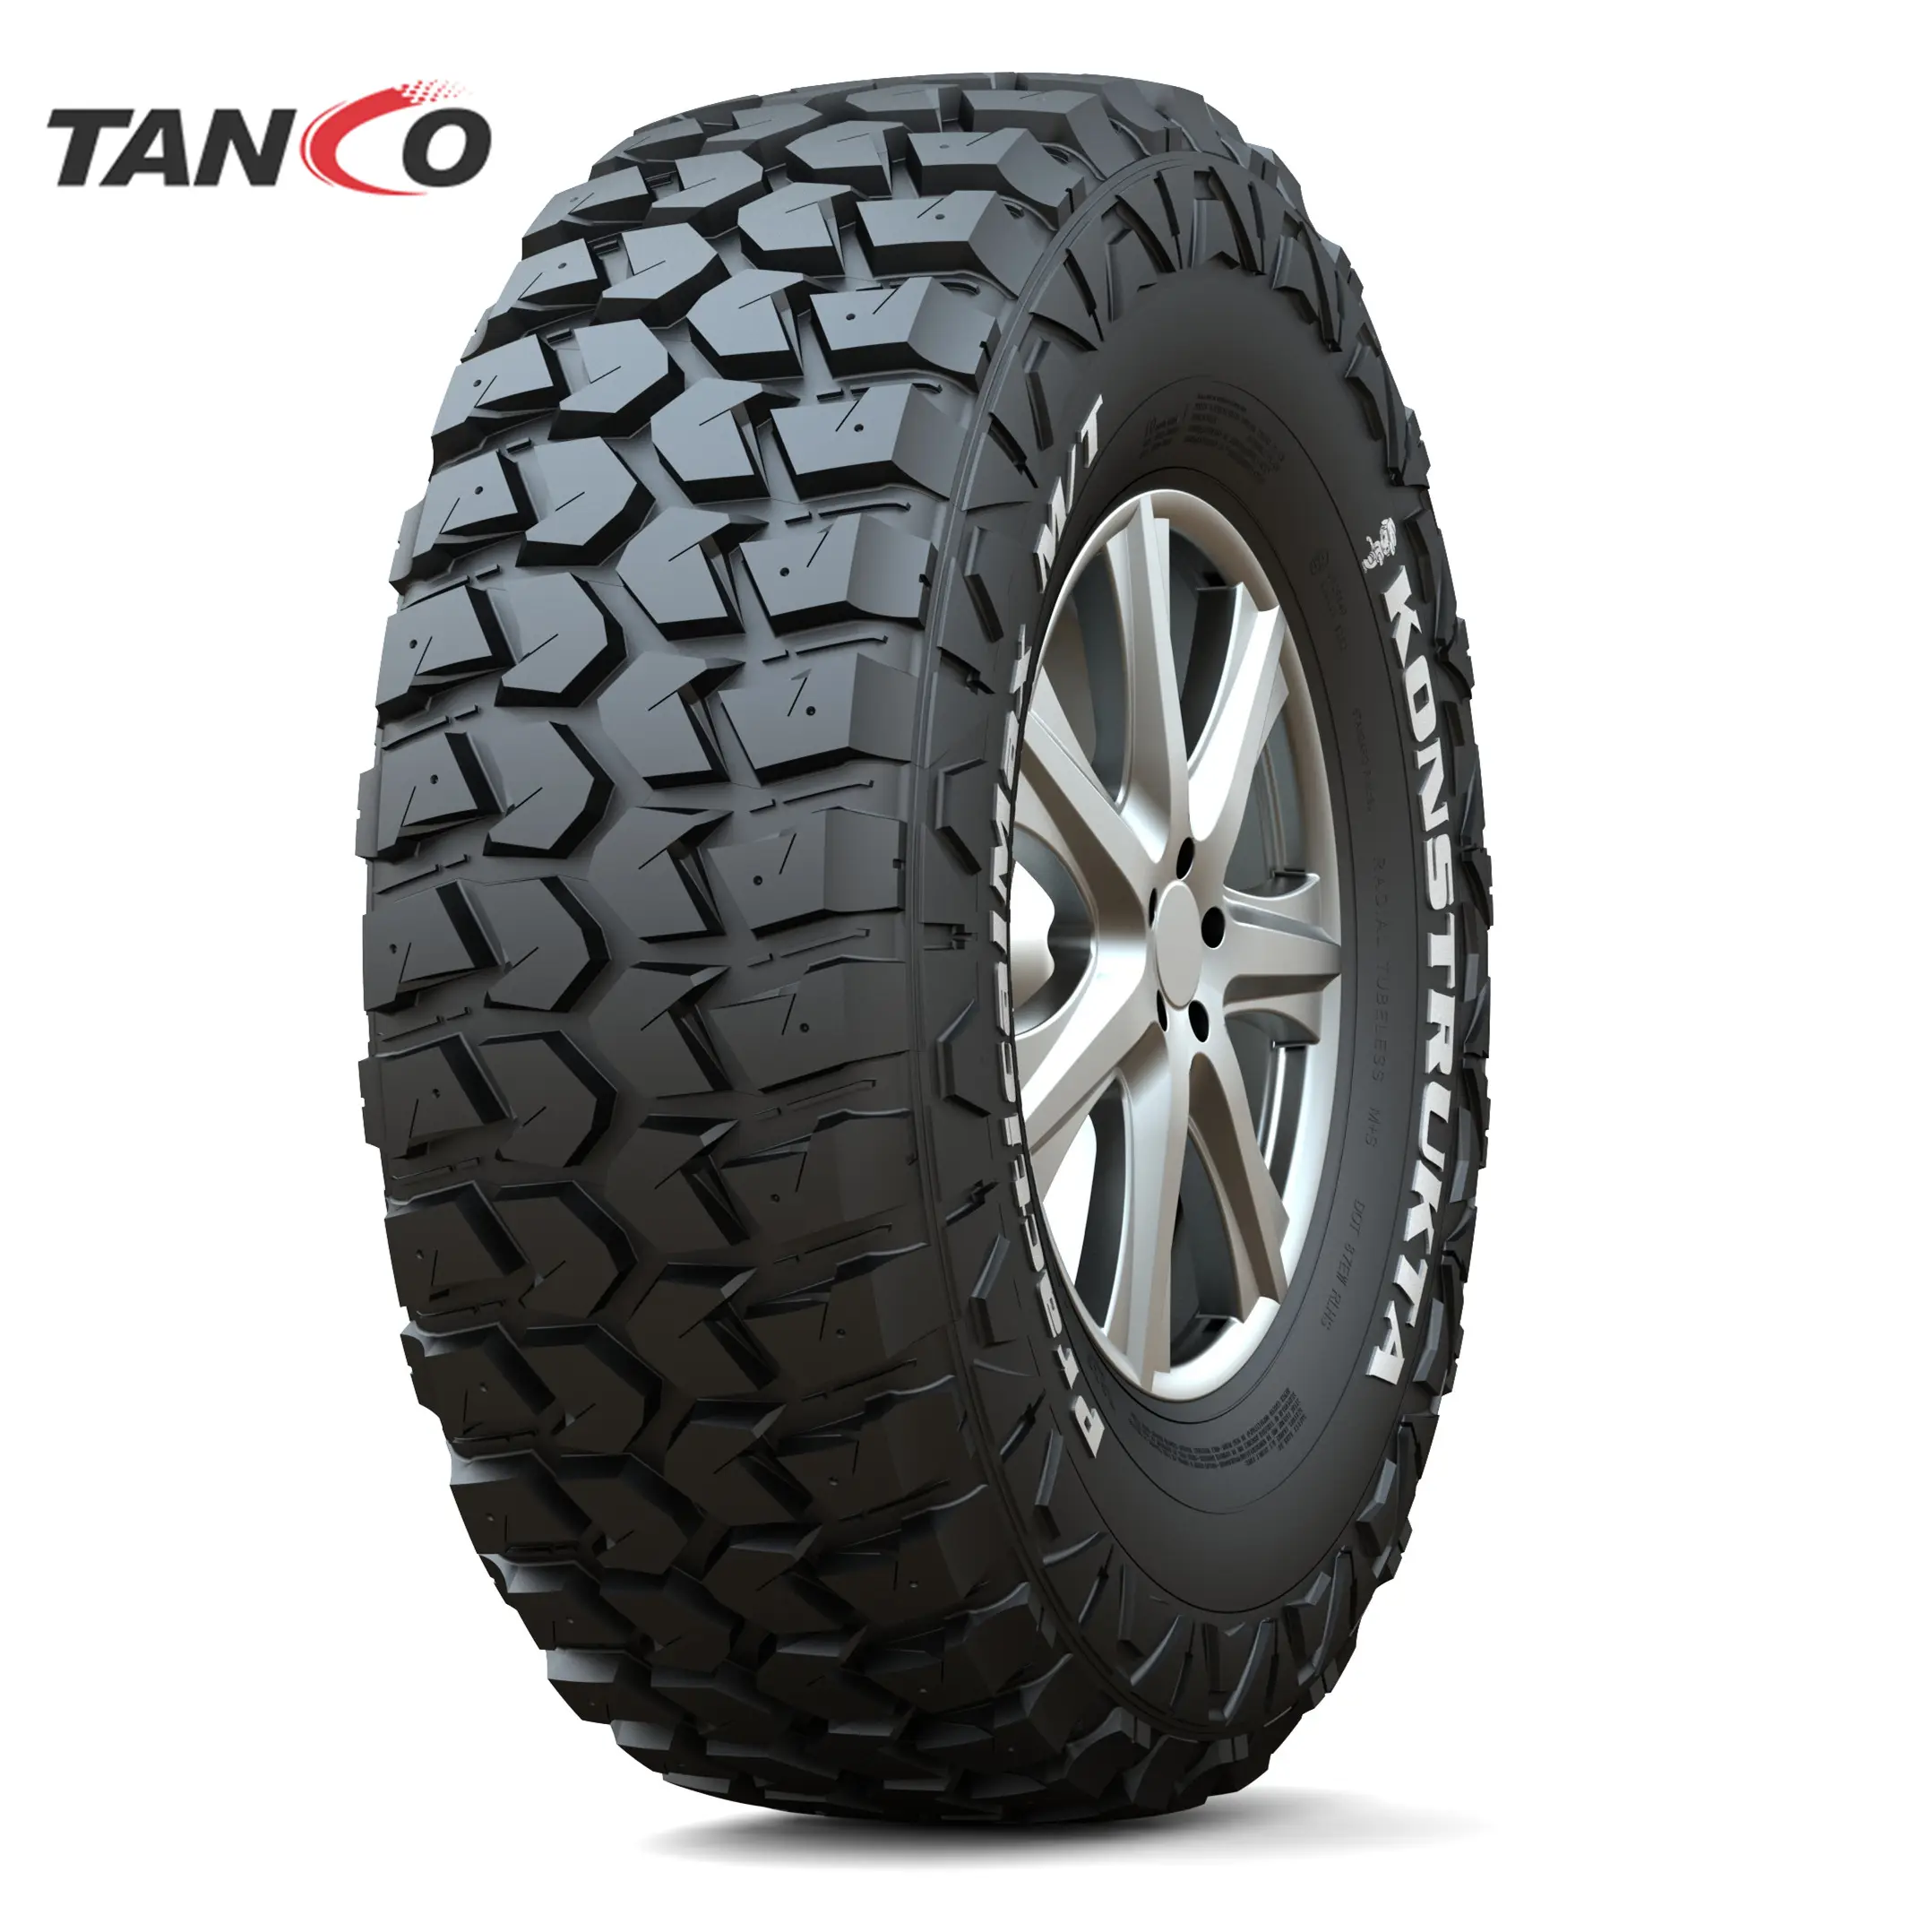 215/65r16 Tire China Trade,Buy China Direct From 215/65r16 Tire 